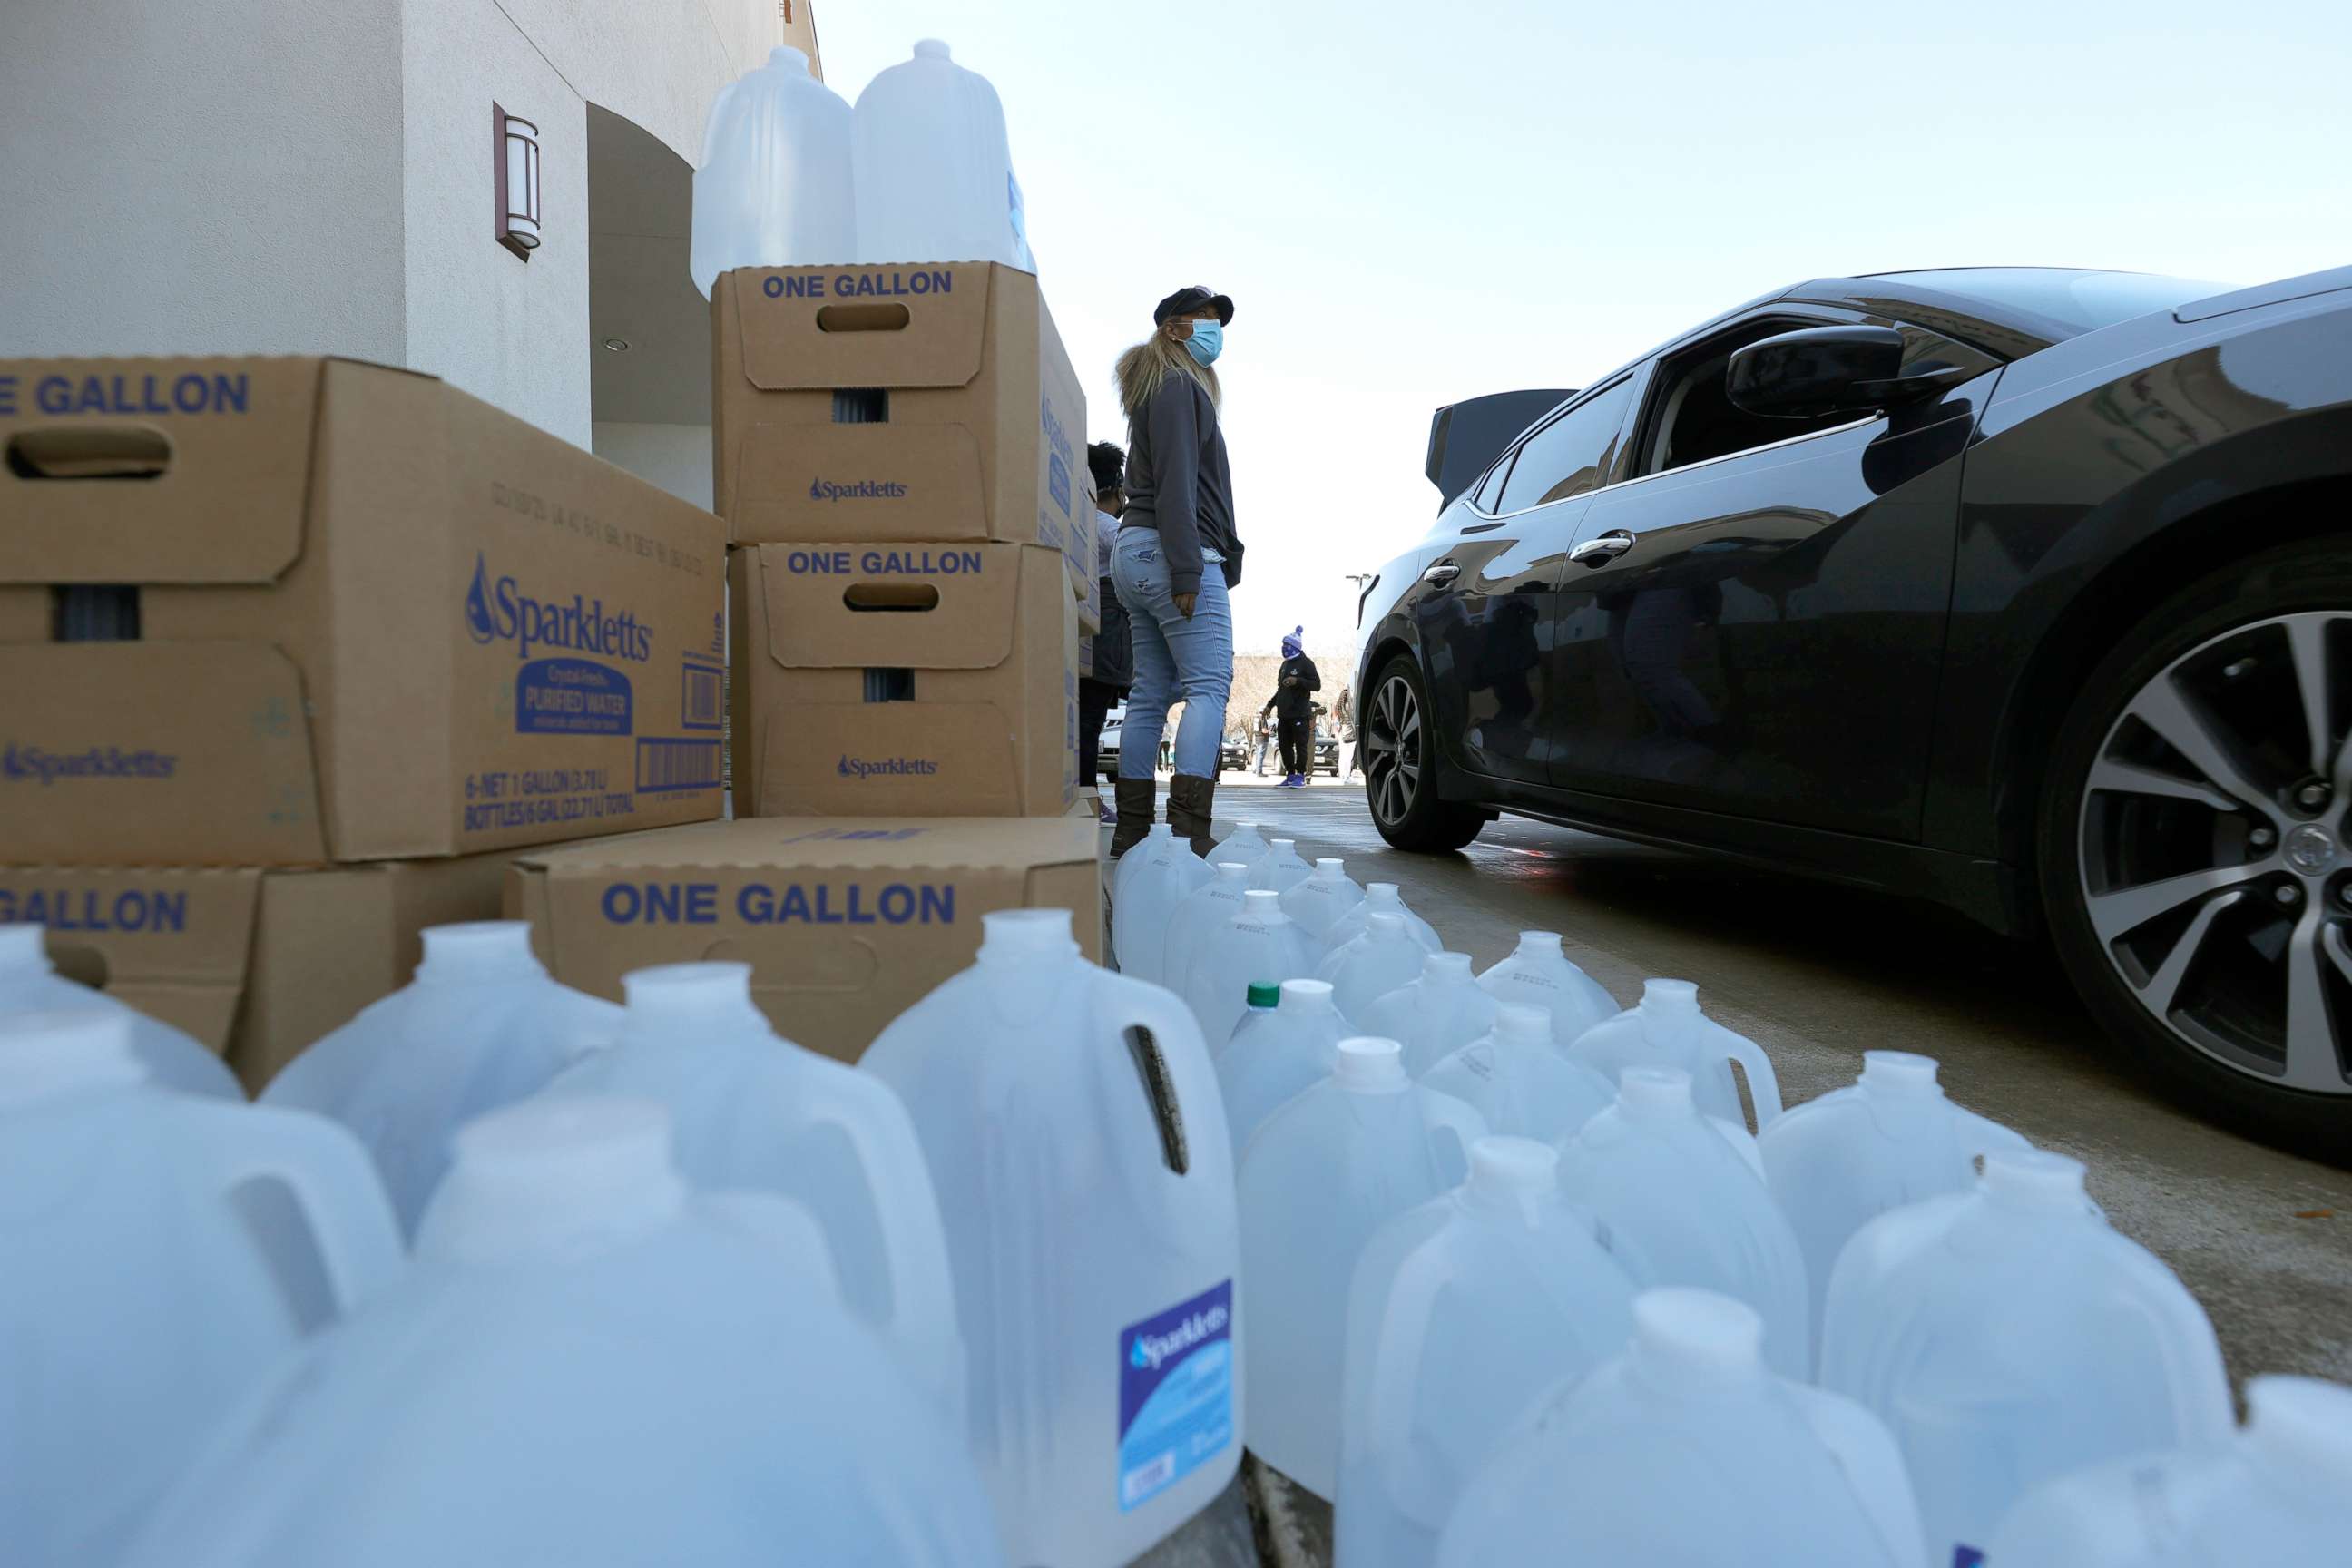 PHOTO: Volunteers prepare to hand out water during a water distribution event at the Fountain Life Center on Feb. 20, 2021 in Houston, Texas.